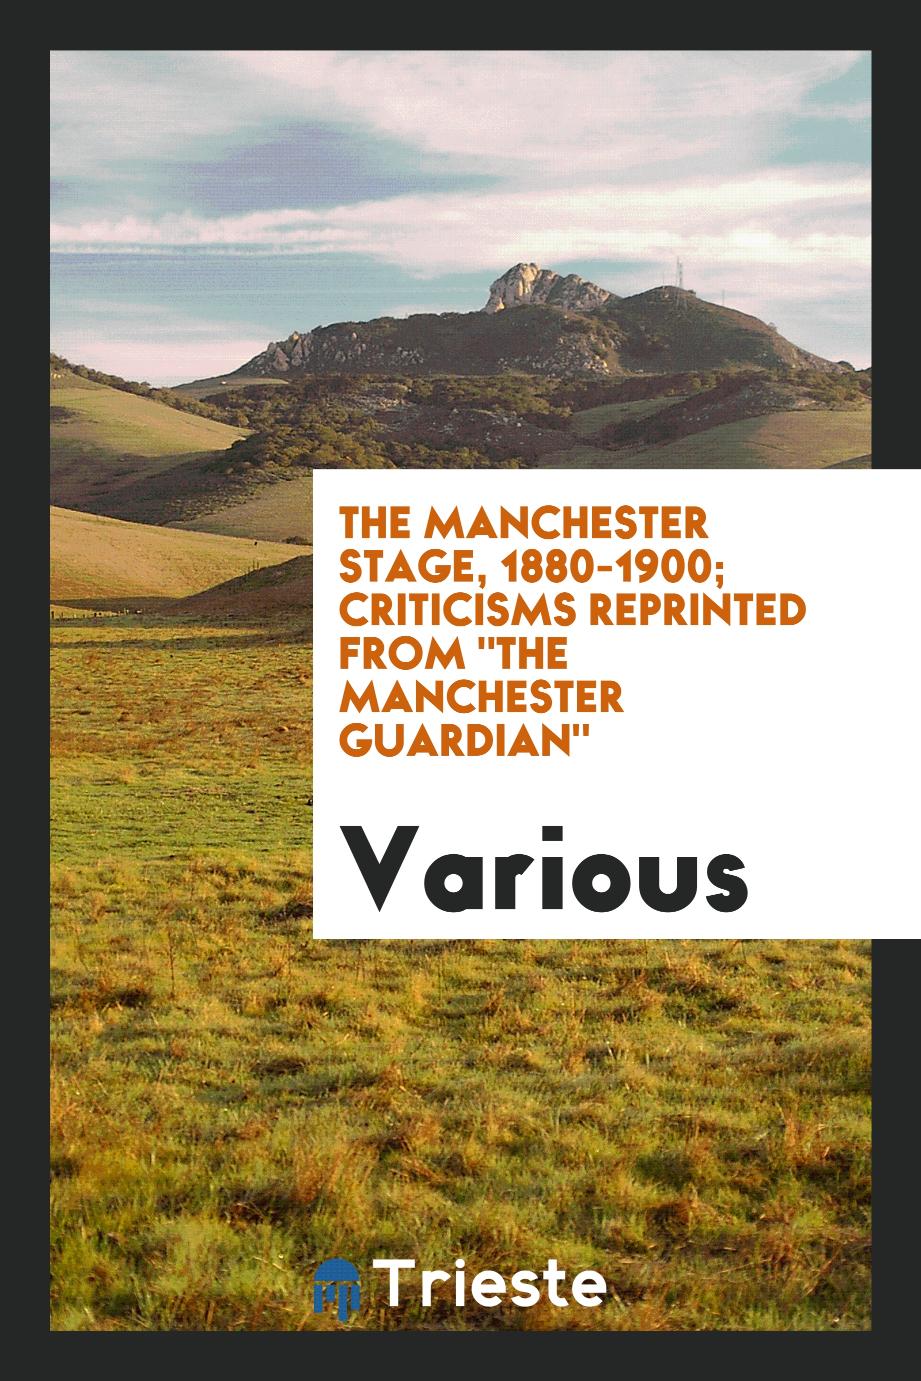 The Manchester stage, 1880-1900; criticisms reprinted from "The Manchester guardian"